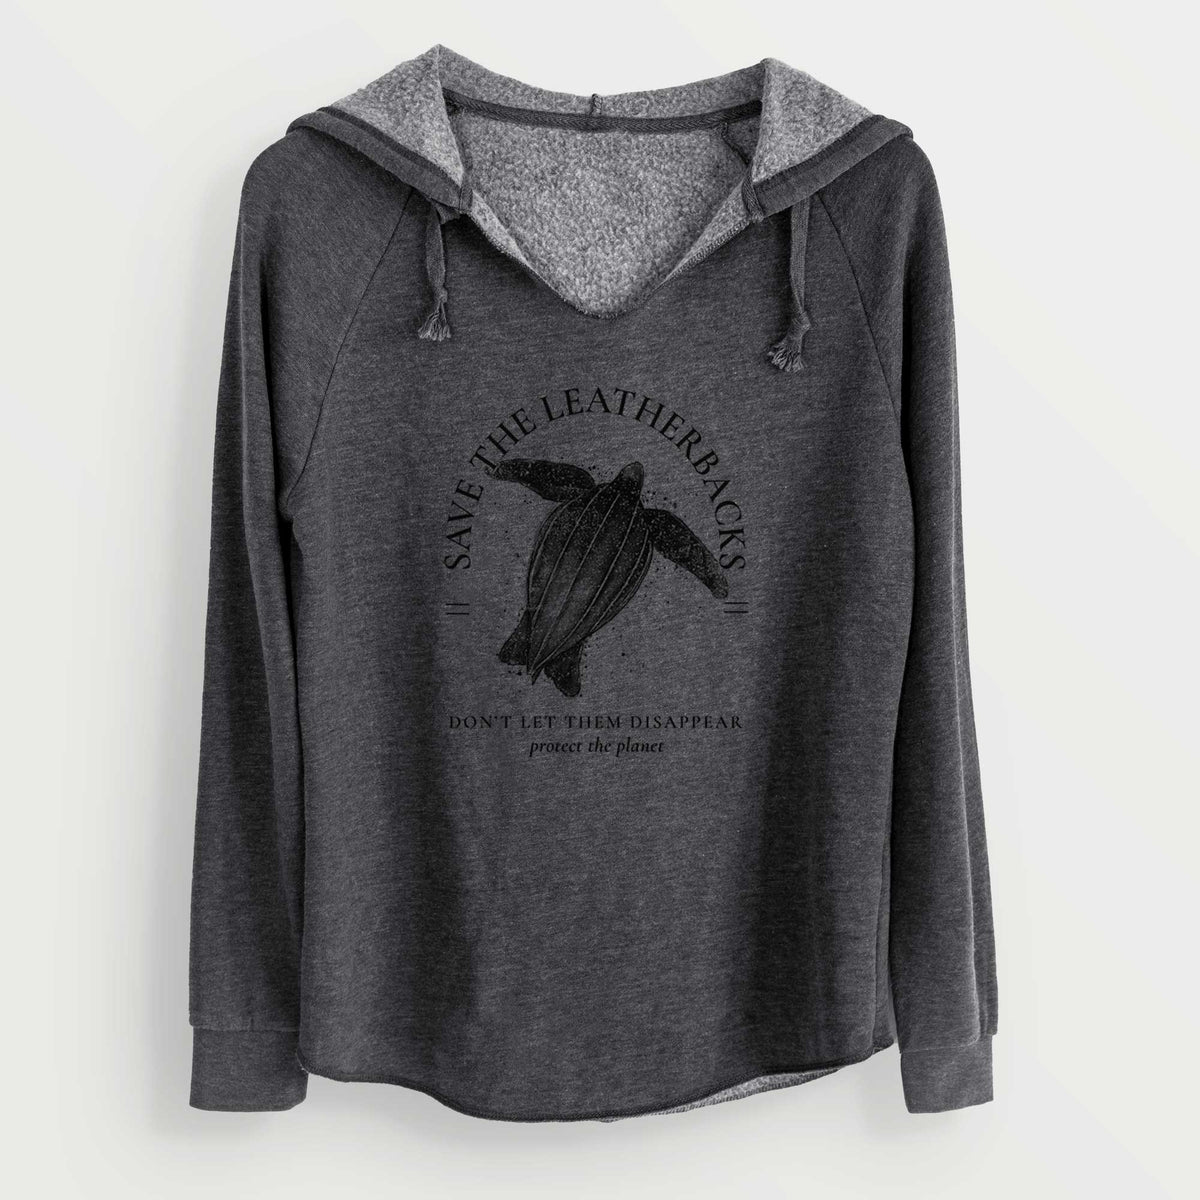 Save the Leatherbacks - Don&#39;t Let Them Disappear - Cali Wave Hooded Sweatshirt